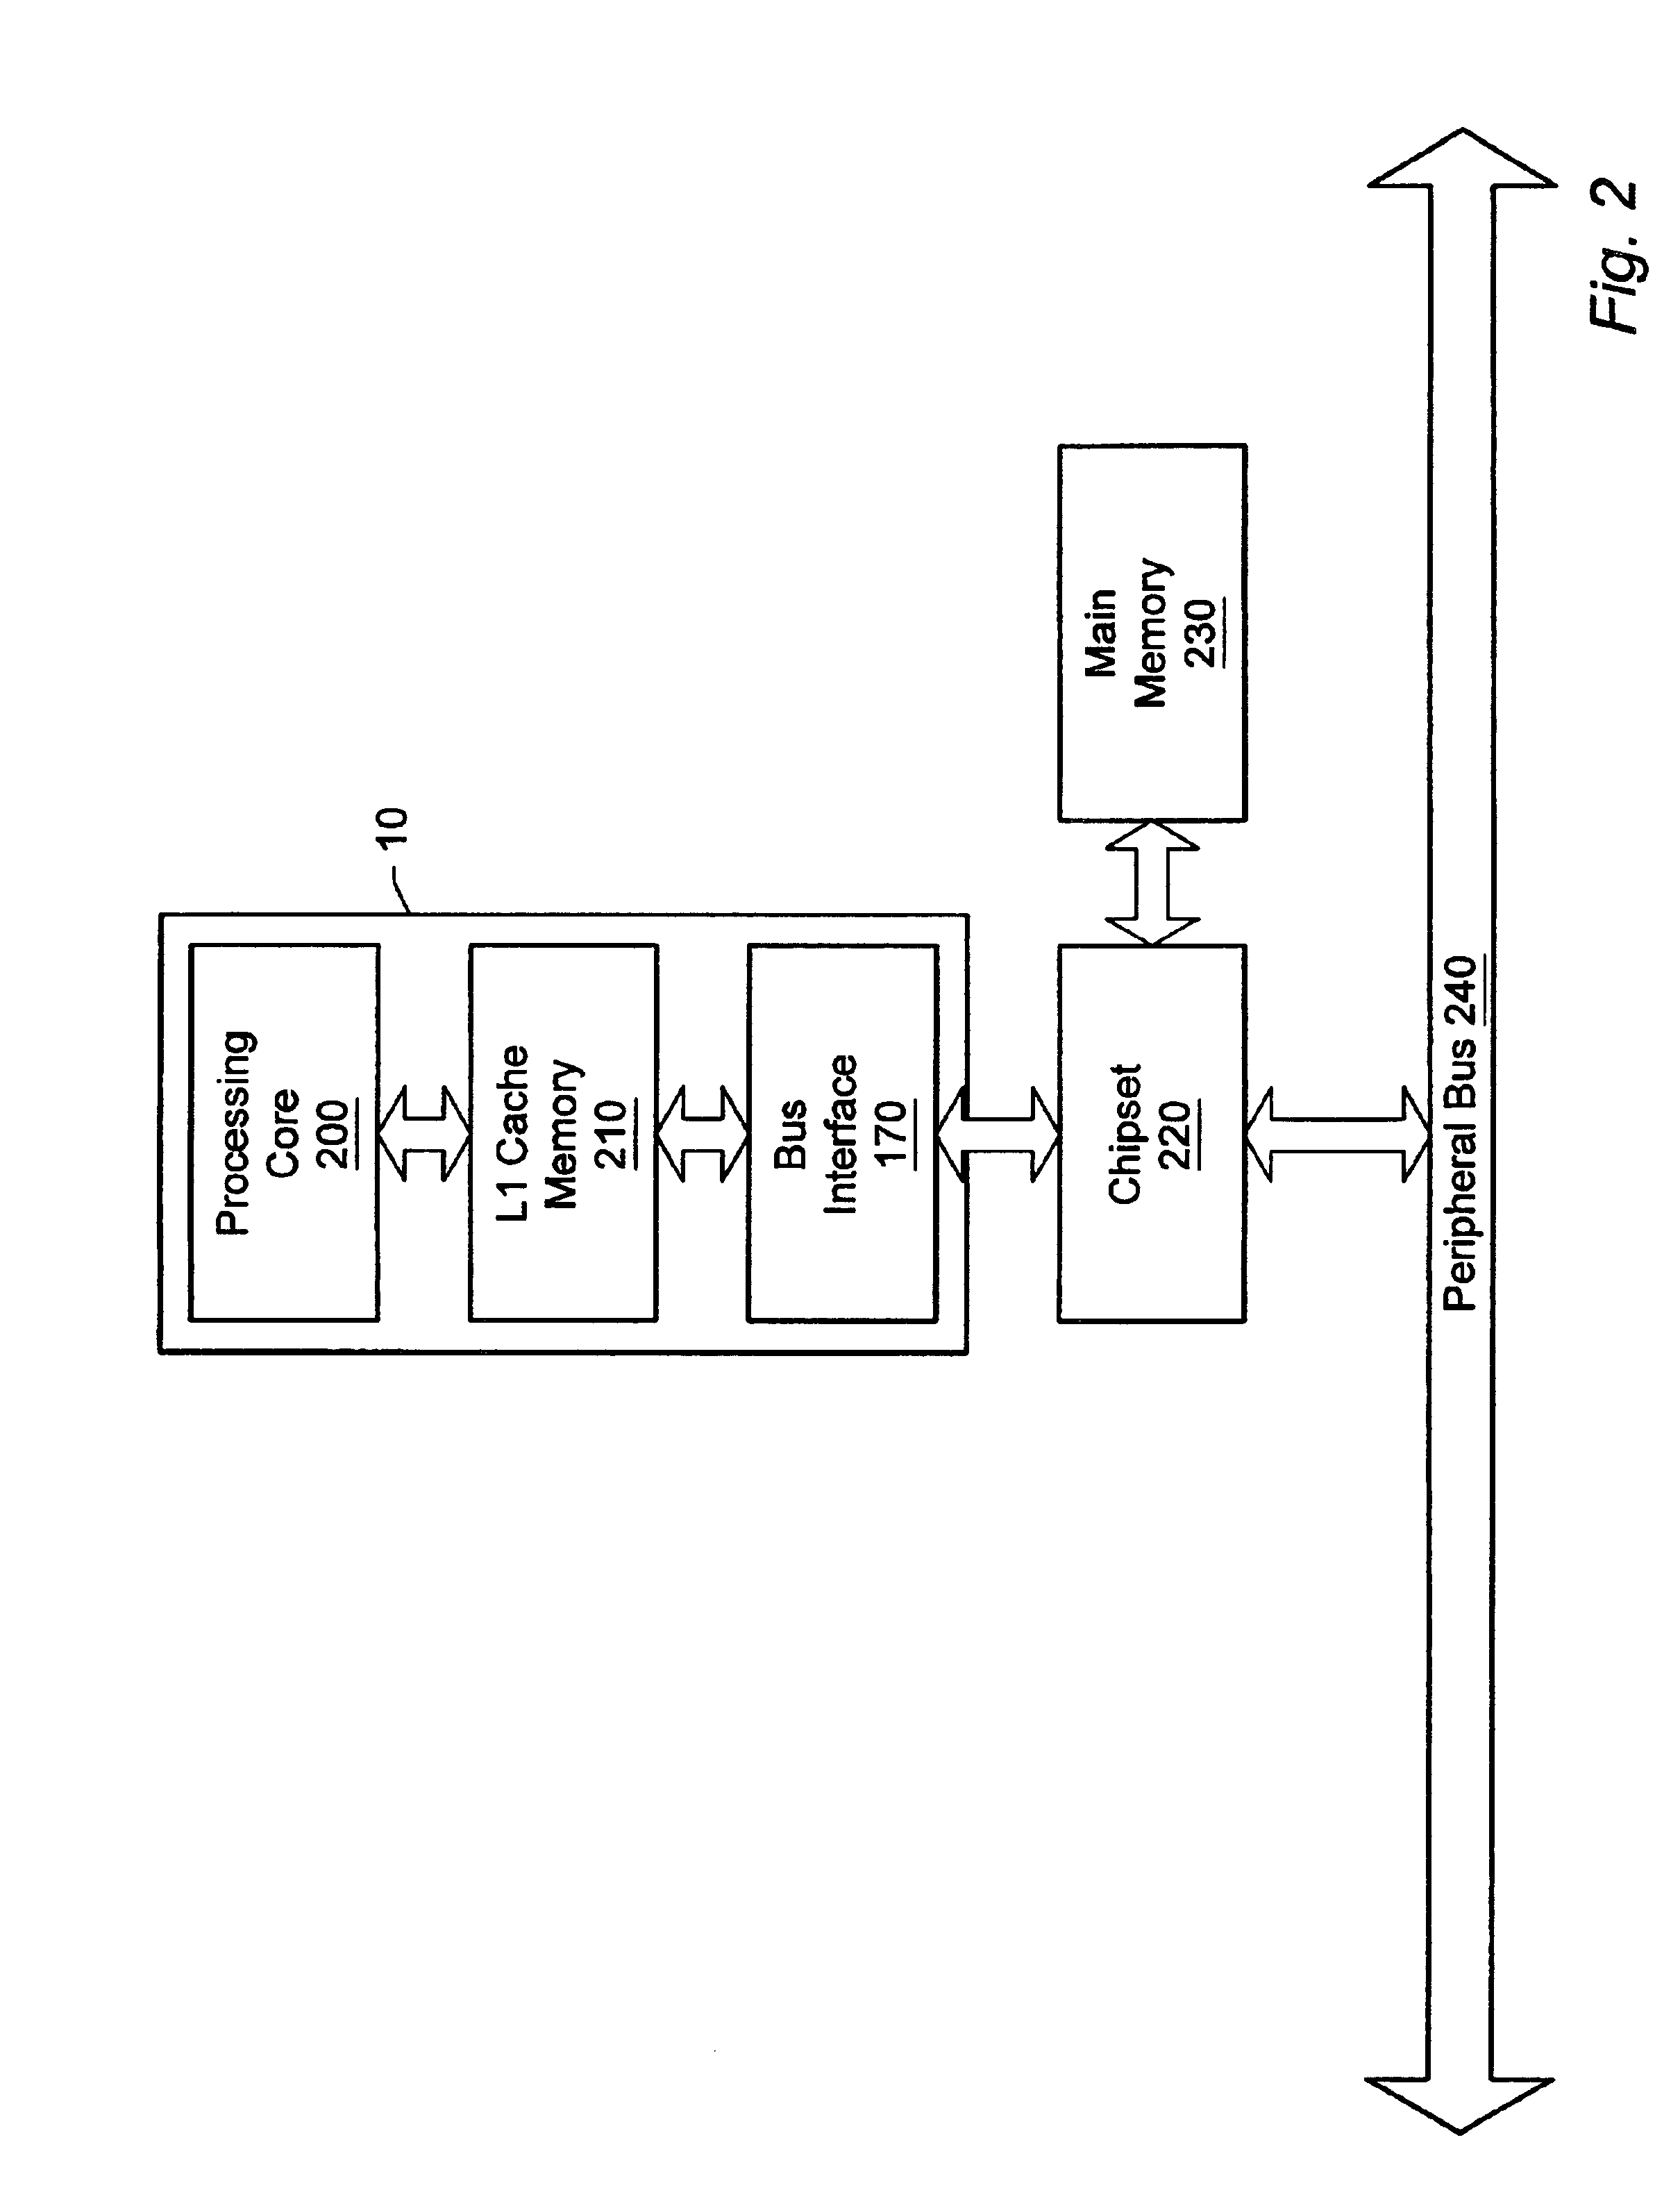 Threshold-based load address prediction and new thread identification in a multithreaded microprocessor